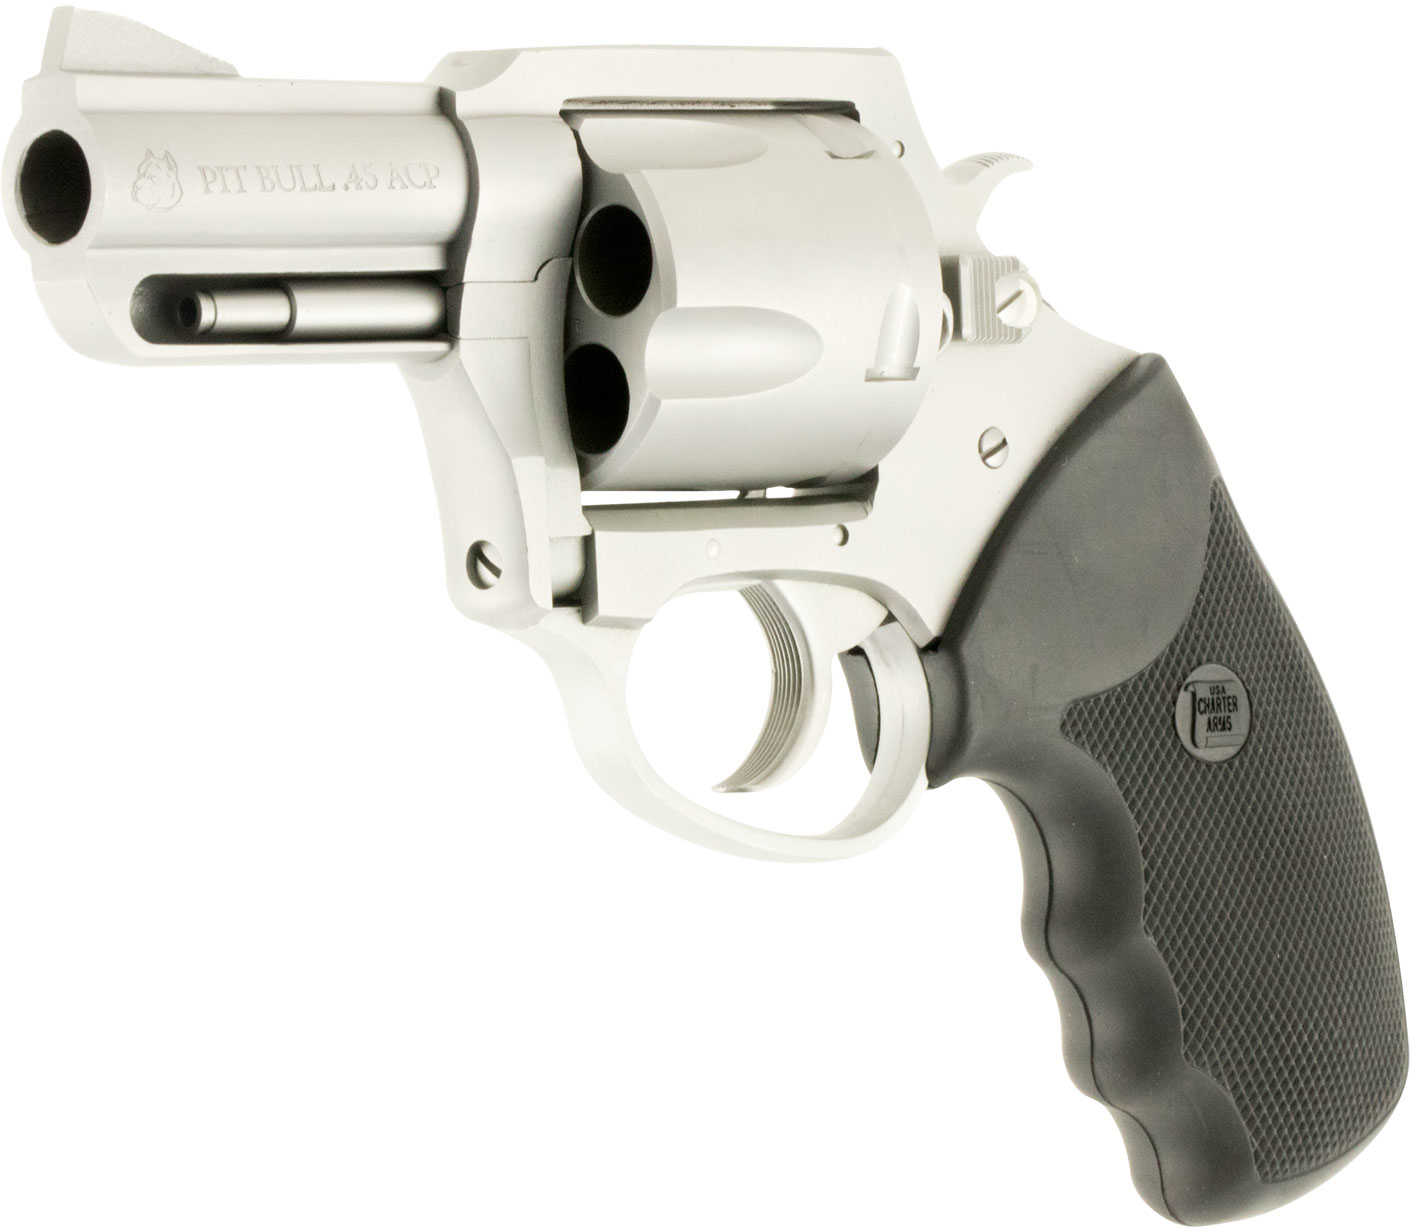 Charter Arms Pitbull Revolver 45 ACP 2.5" Barrel Stainless Steel Rubber Grip 5 Round